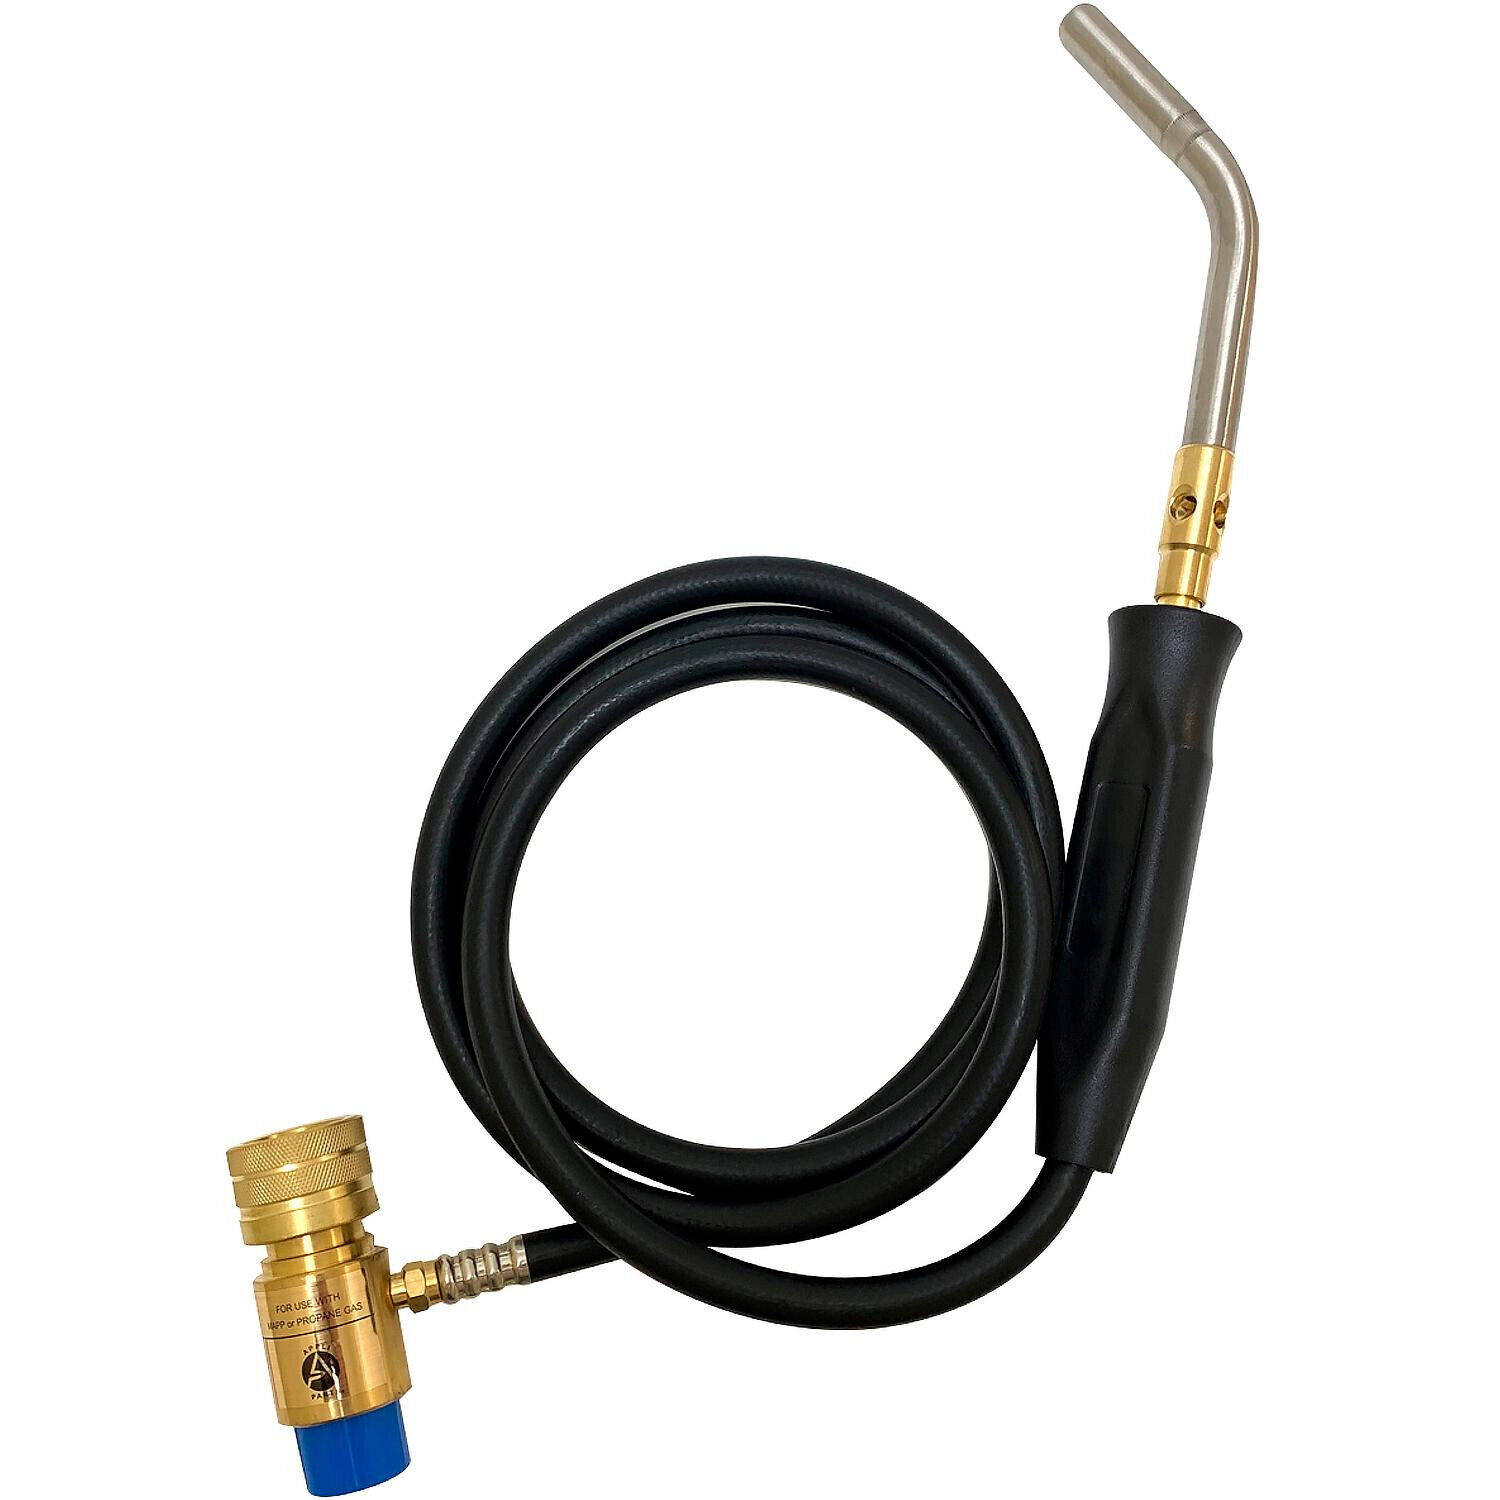 Appli Parts APHT-3W single burner hand torch with 5 ft hose and handle for solde